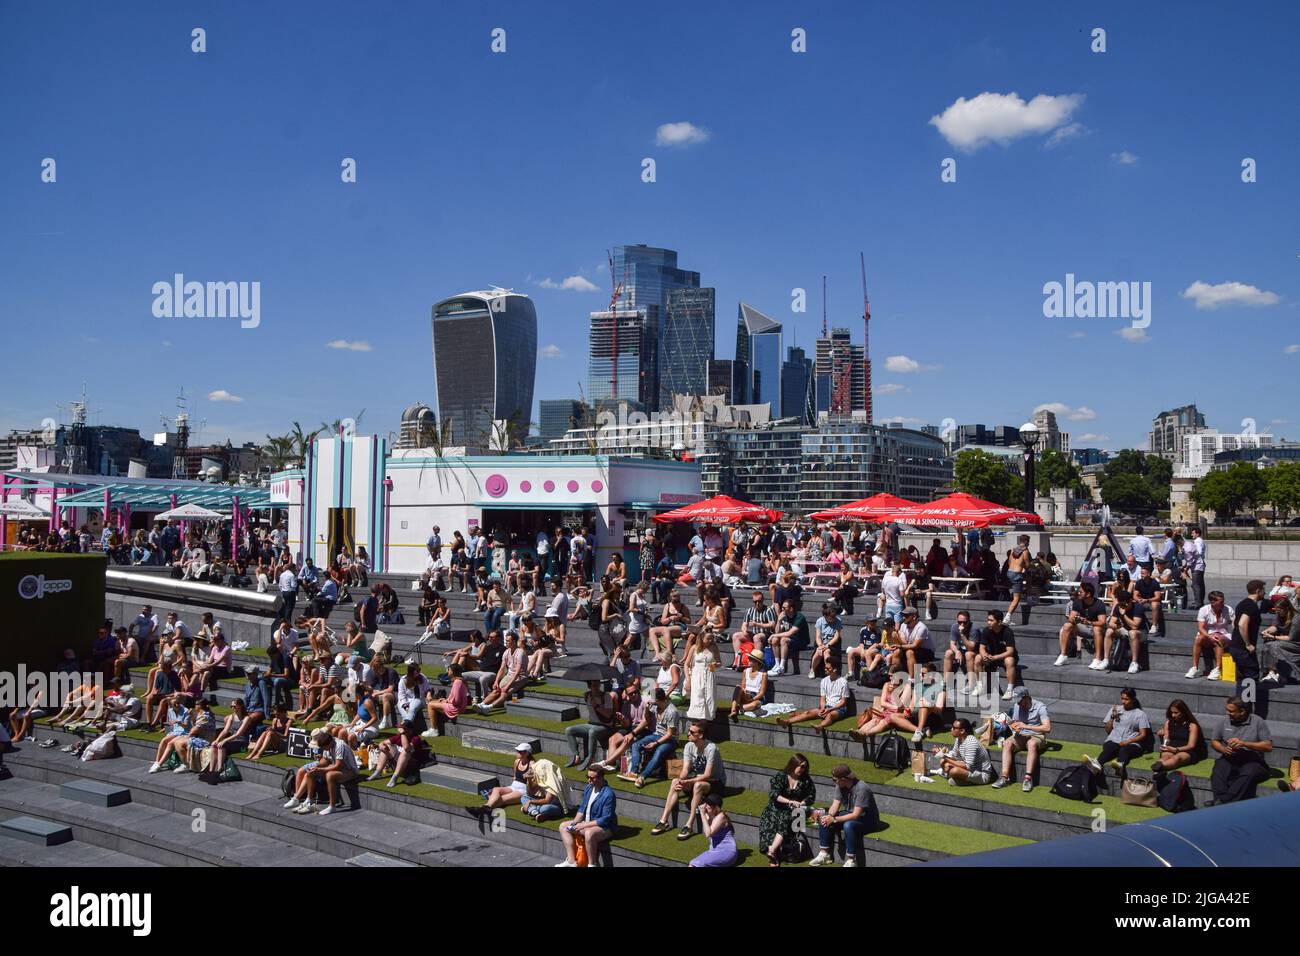 People watch Wimbledon tennis matches on a large outdoor screen near Tower Bridge as temperatures rise in the capital